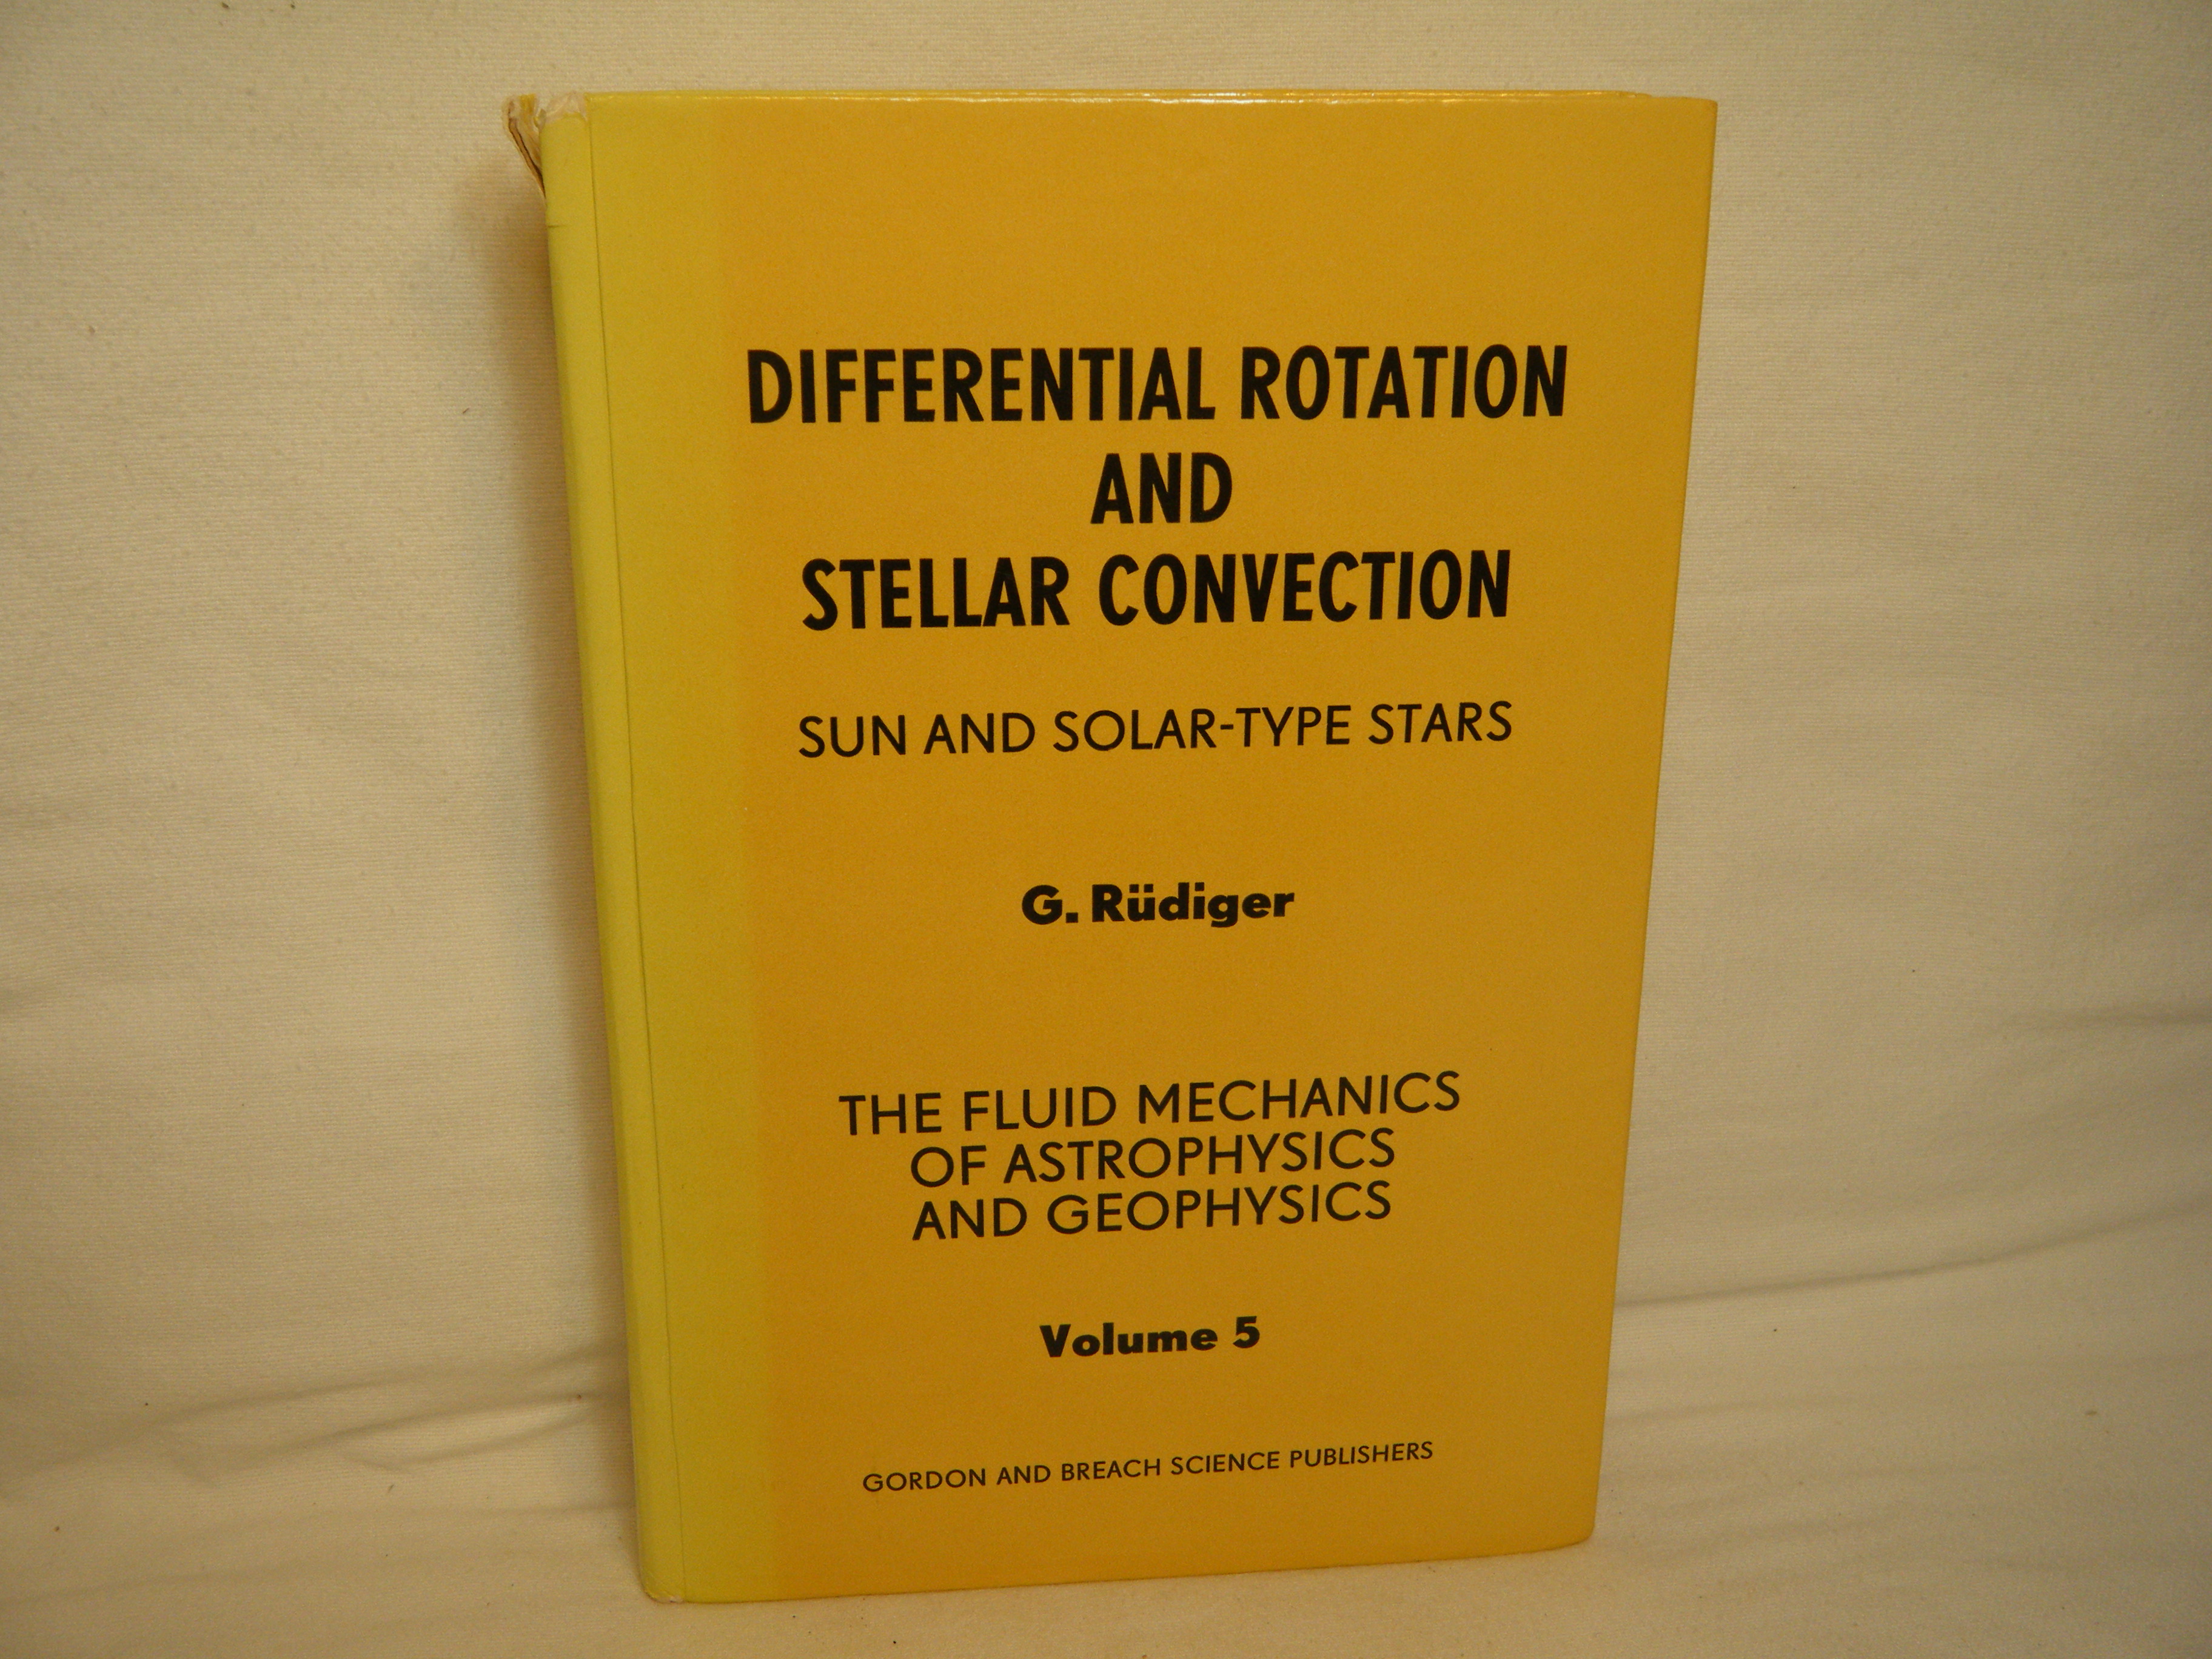 Differential Rotation and Stellar Convection - Rudiger, G.